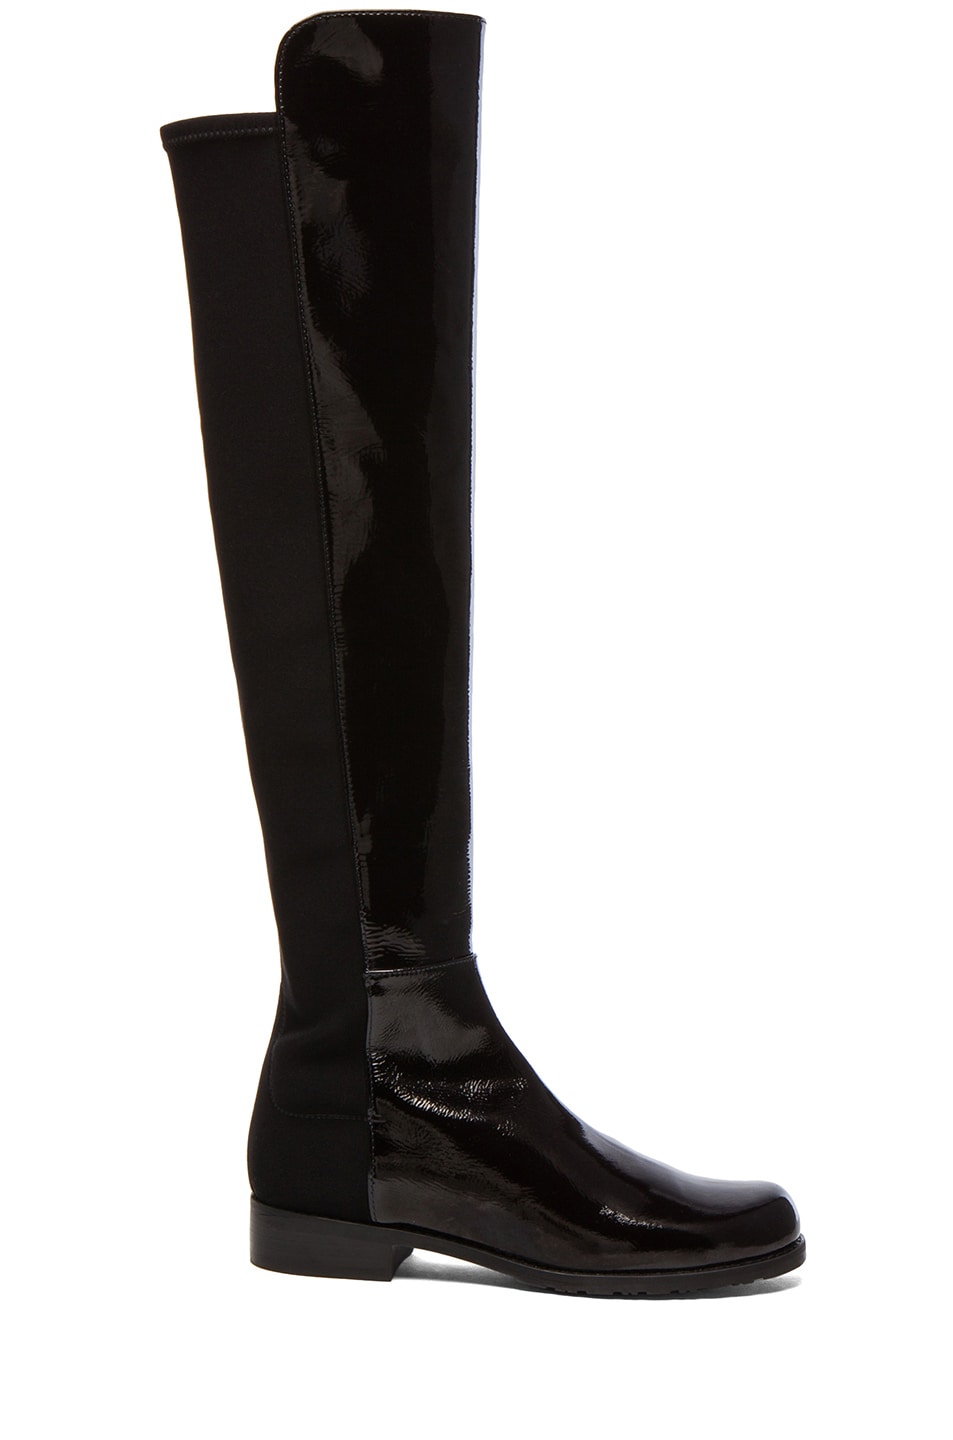 Image 1 of Stuart Weitzman 50/50 Stretch Leather Boots in Black Patent